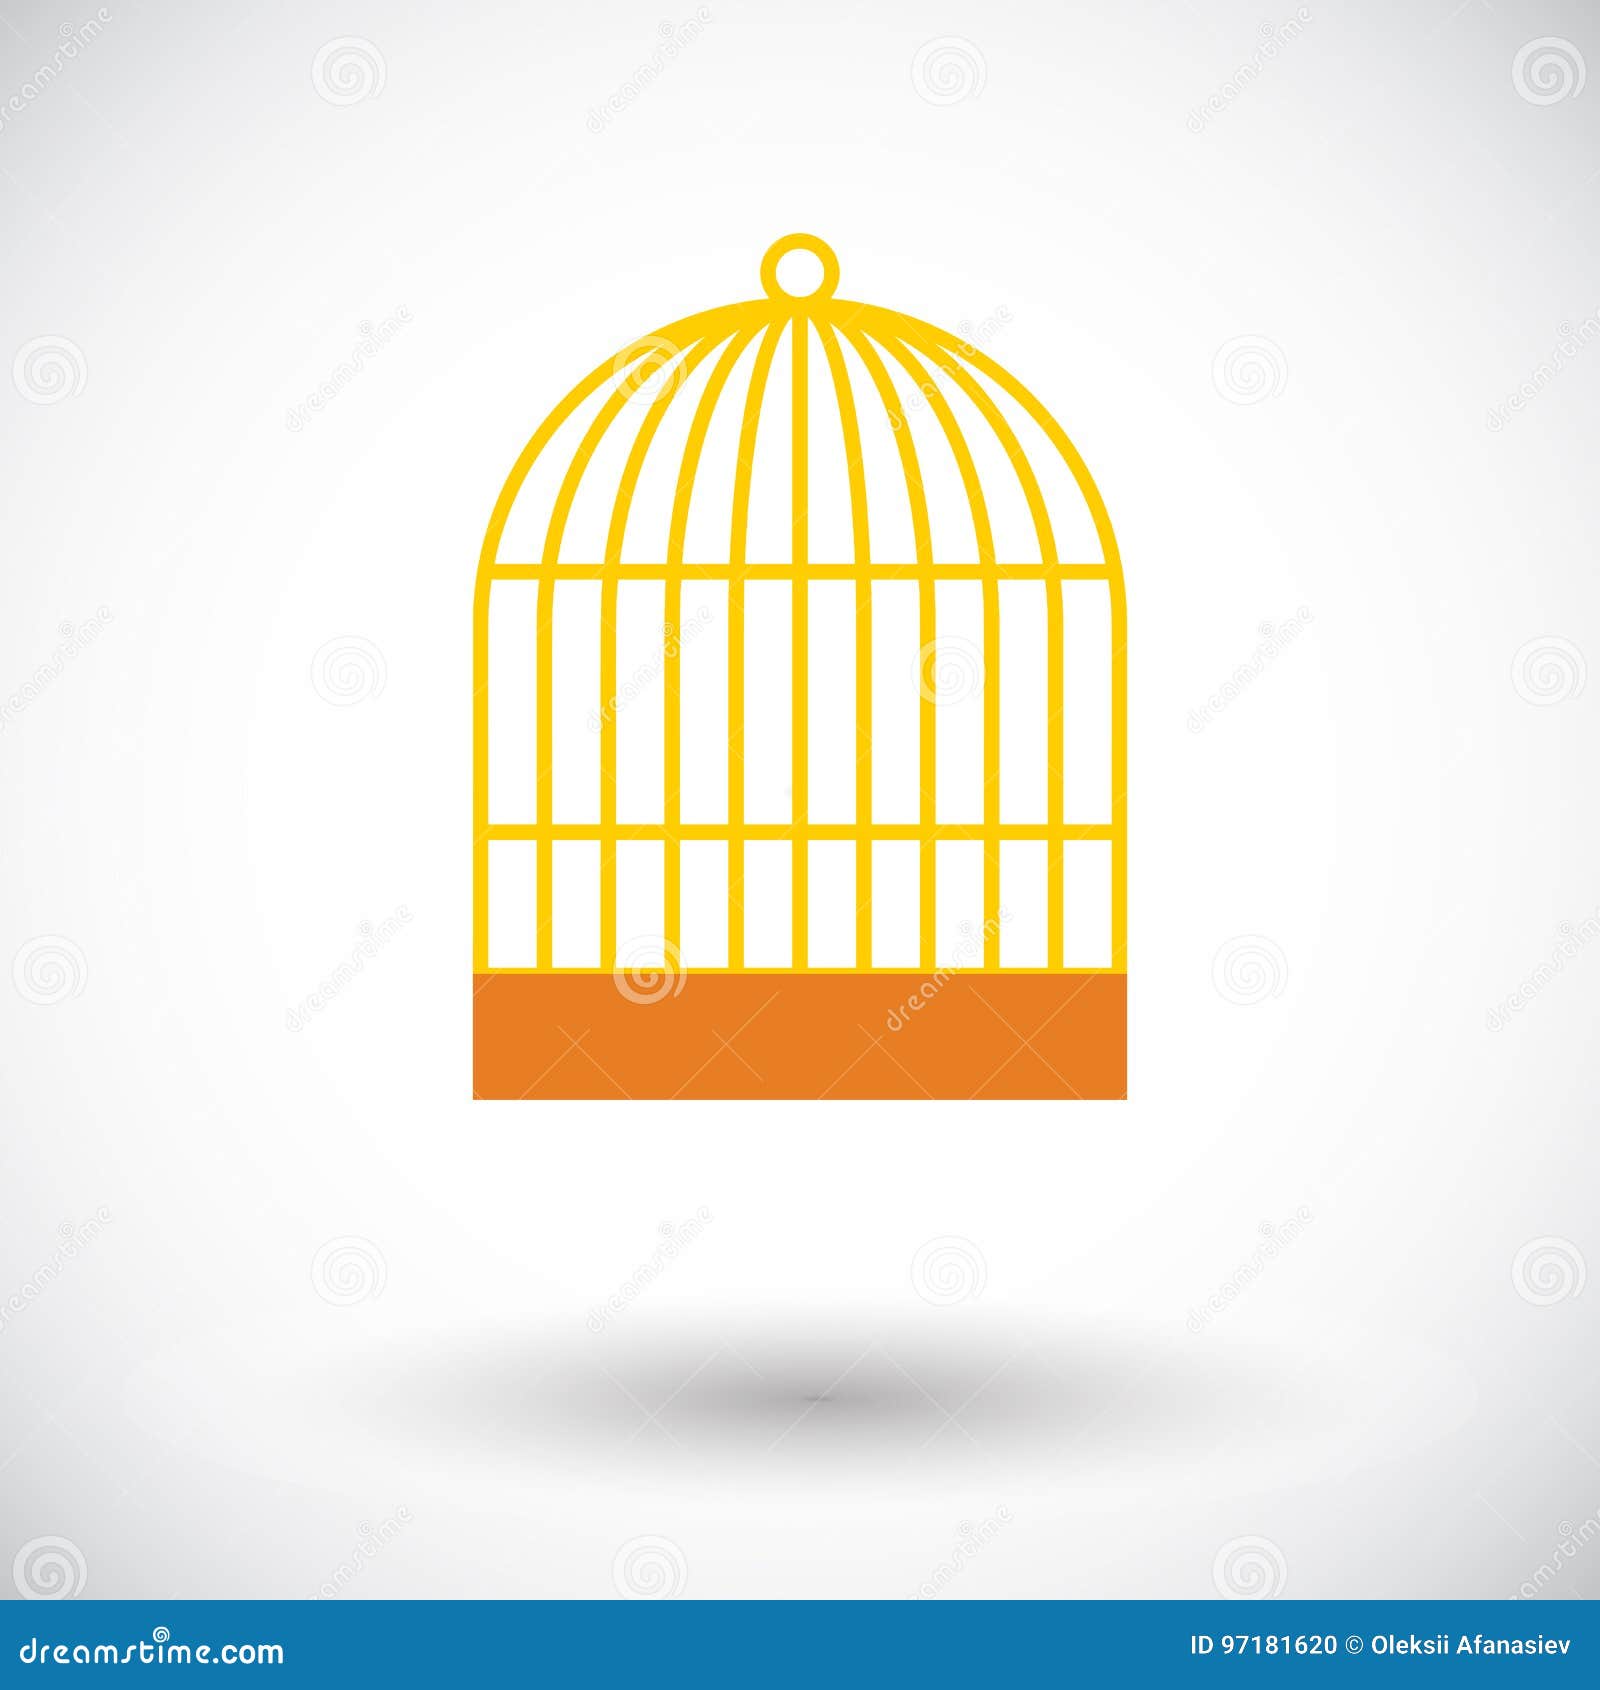 Cage icon stock vector. Illustration of escape, drawing - 97181620